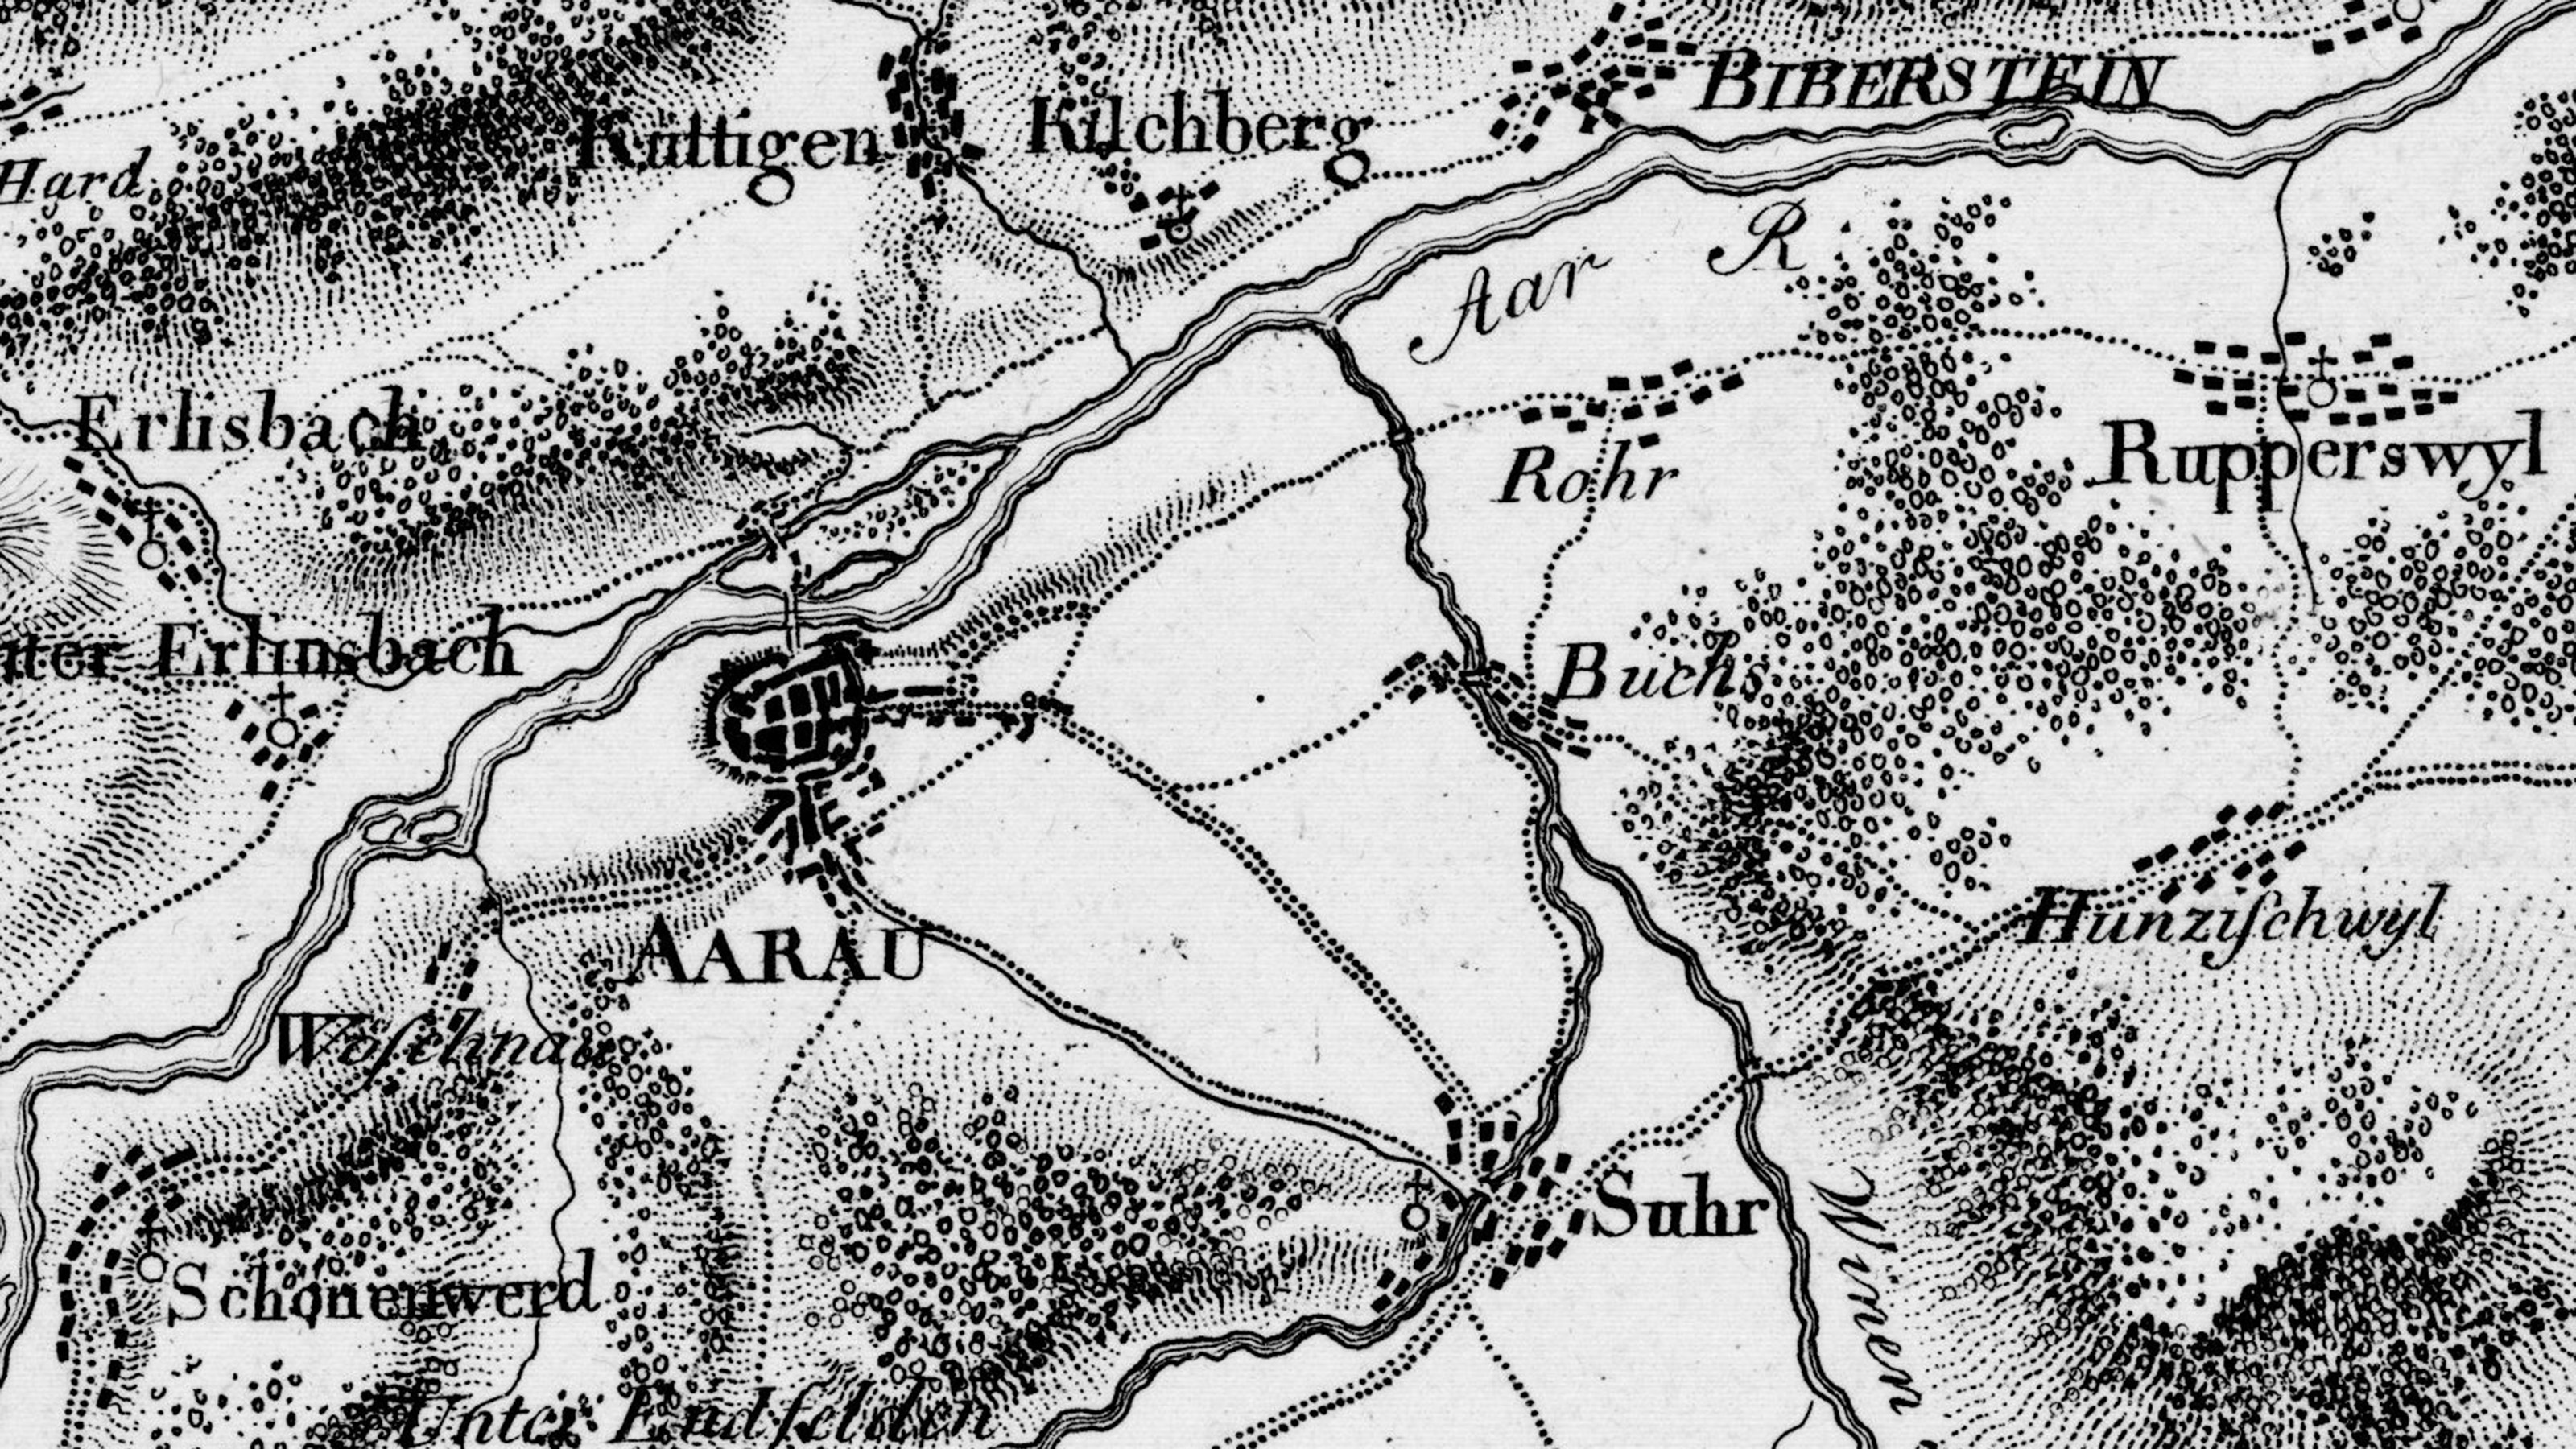 The Aarau area on sheet 2 of the Atlas Suisse from 1800.